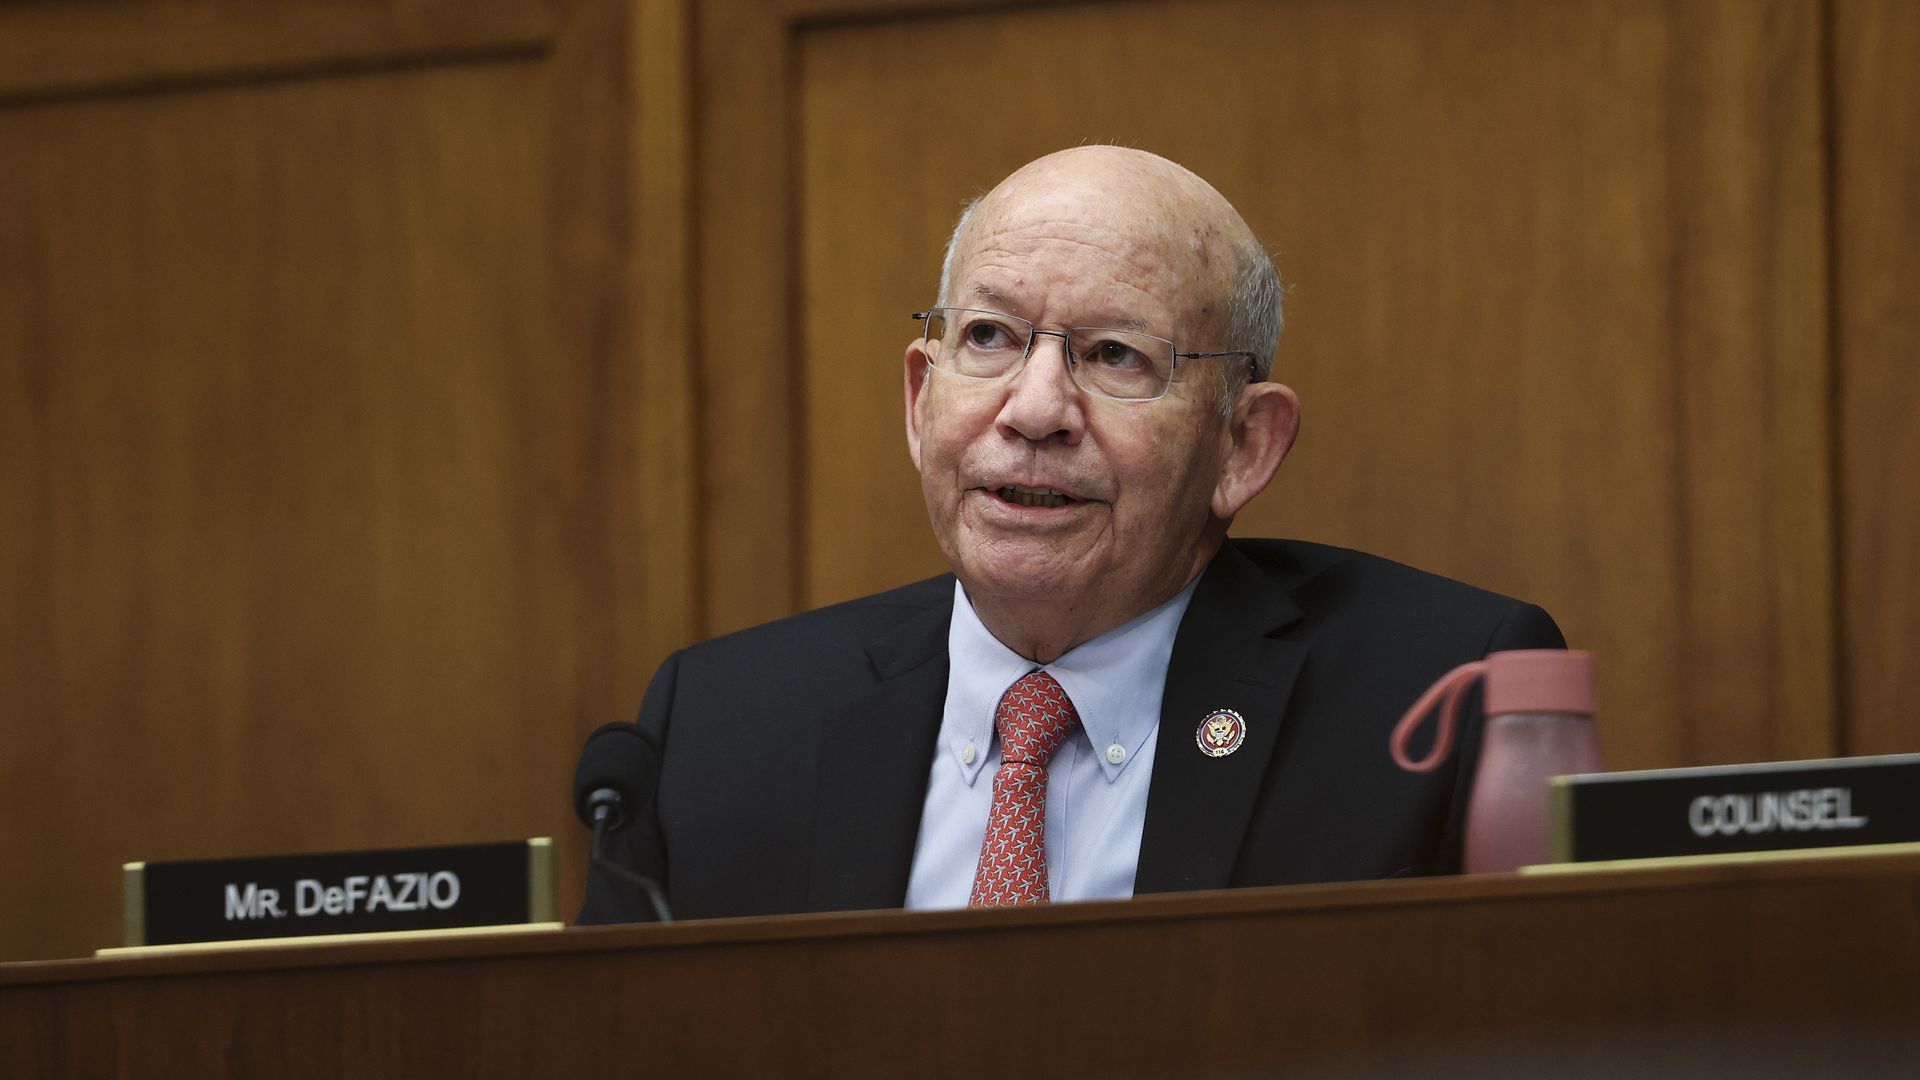 Photo of Peter DeFazio speaking while sitting in a chamber